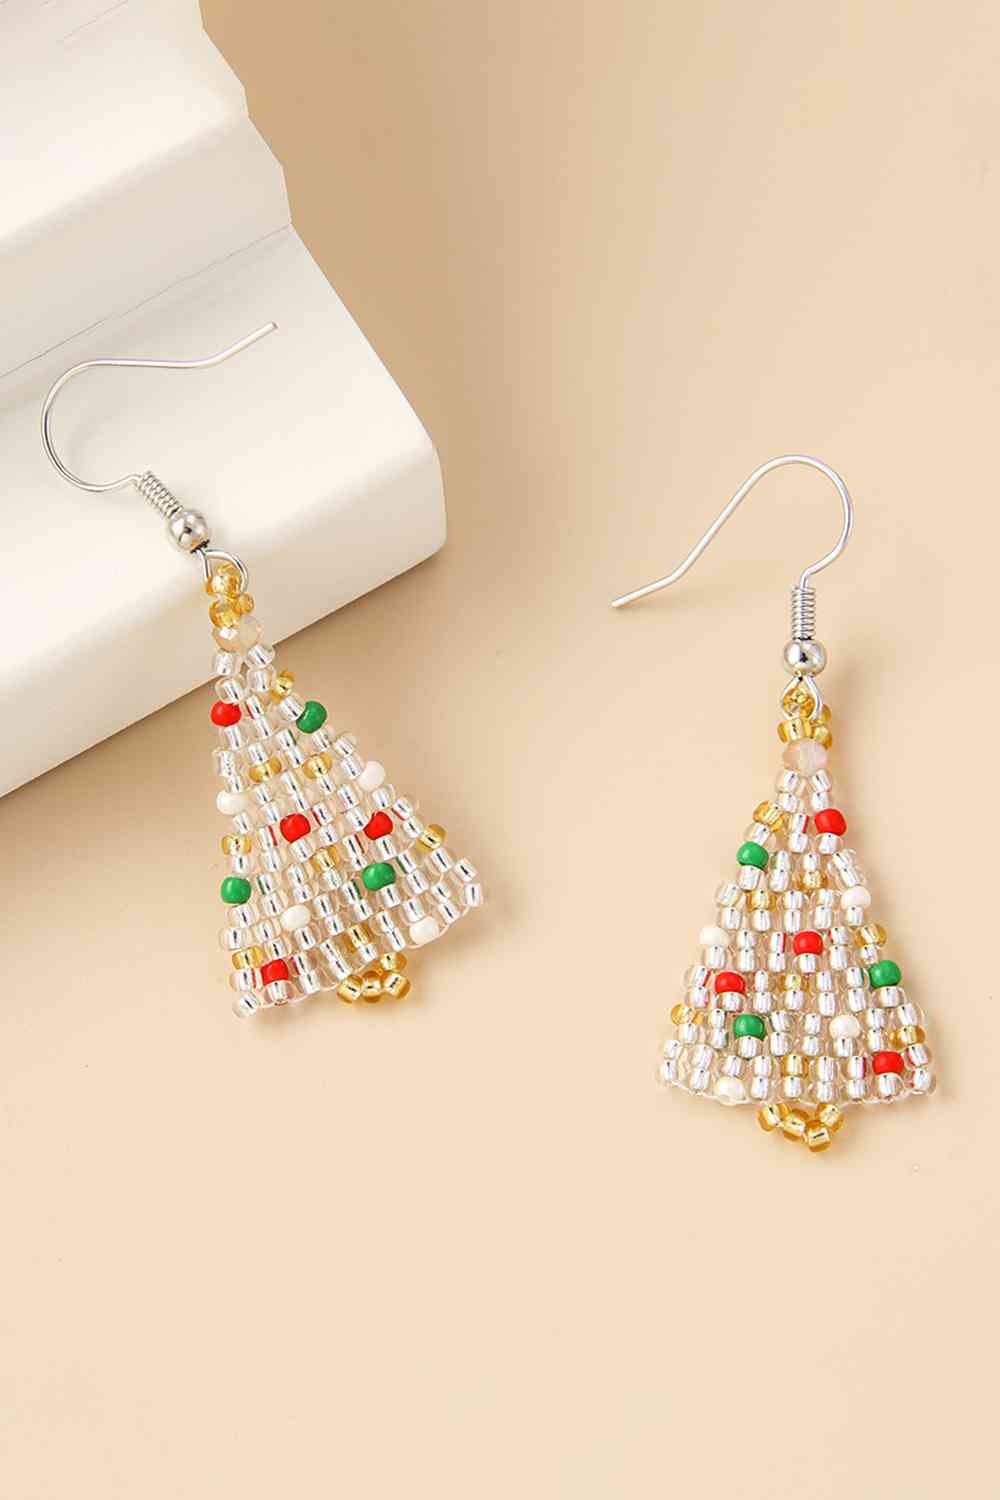 Beaded Christmas Tree Earrings - Kawaii Stop - Beaded accessories, Christmas, Christmas earrings, Christmas fashion, Christmas party, Festive outfit, Gift ideas, Glamorous earrings, Holiday jewelry, Holiday season, Party-ready earrings, Seasonal bling, Ship From Overseas, Sparkling earrings, Statement jewelry, Unique Christmas gifts, Y.Q@Jew